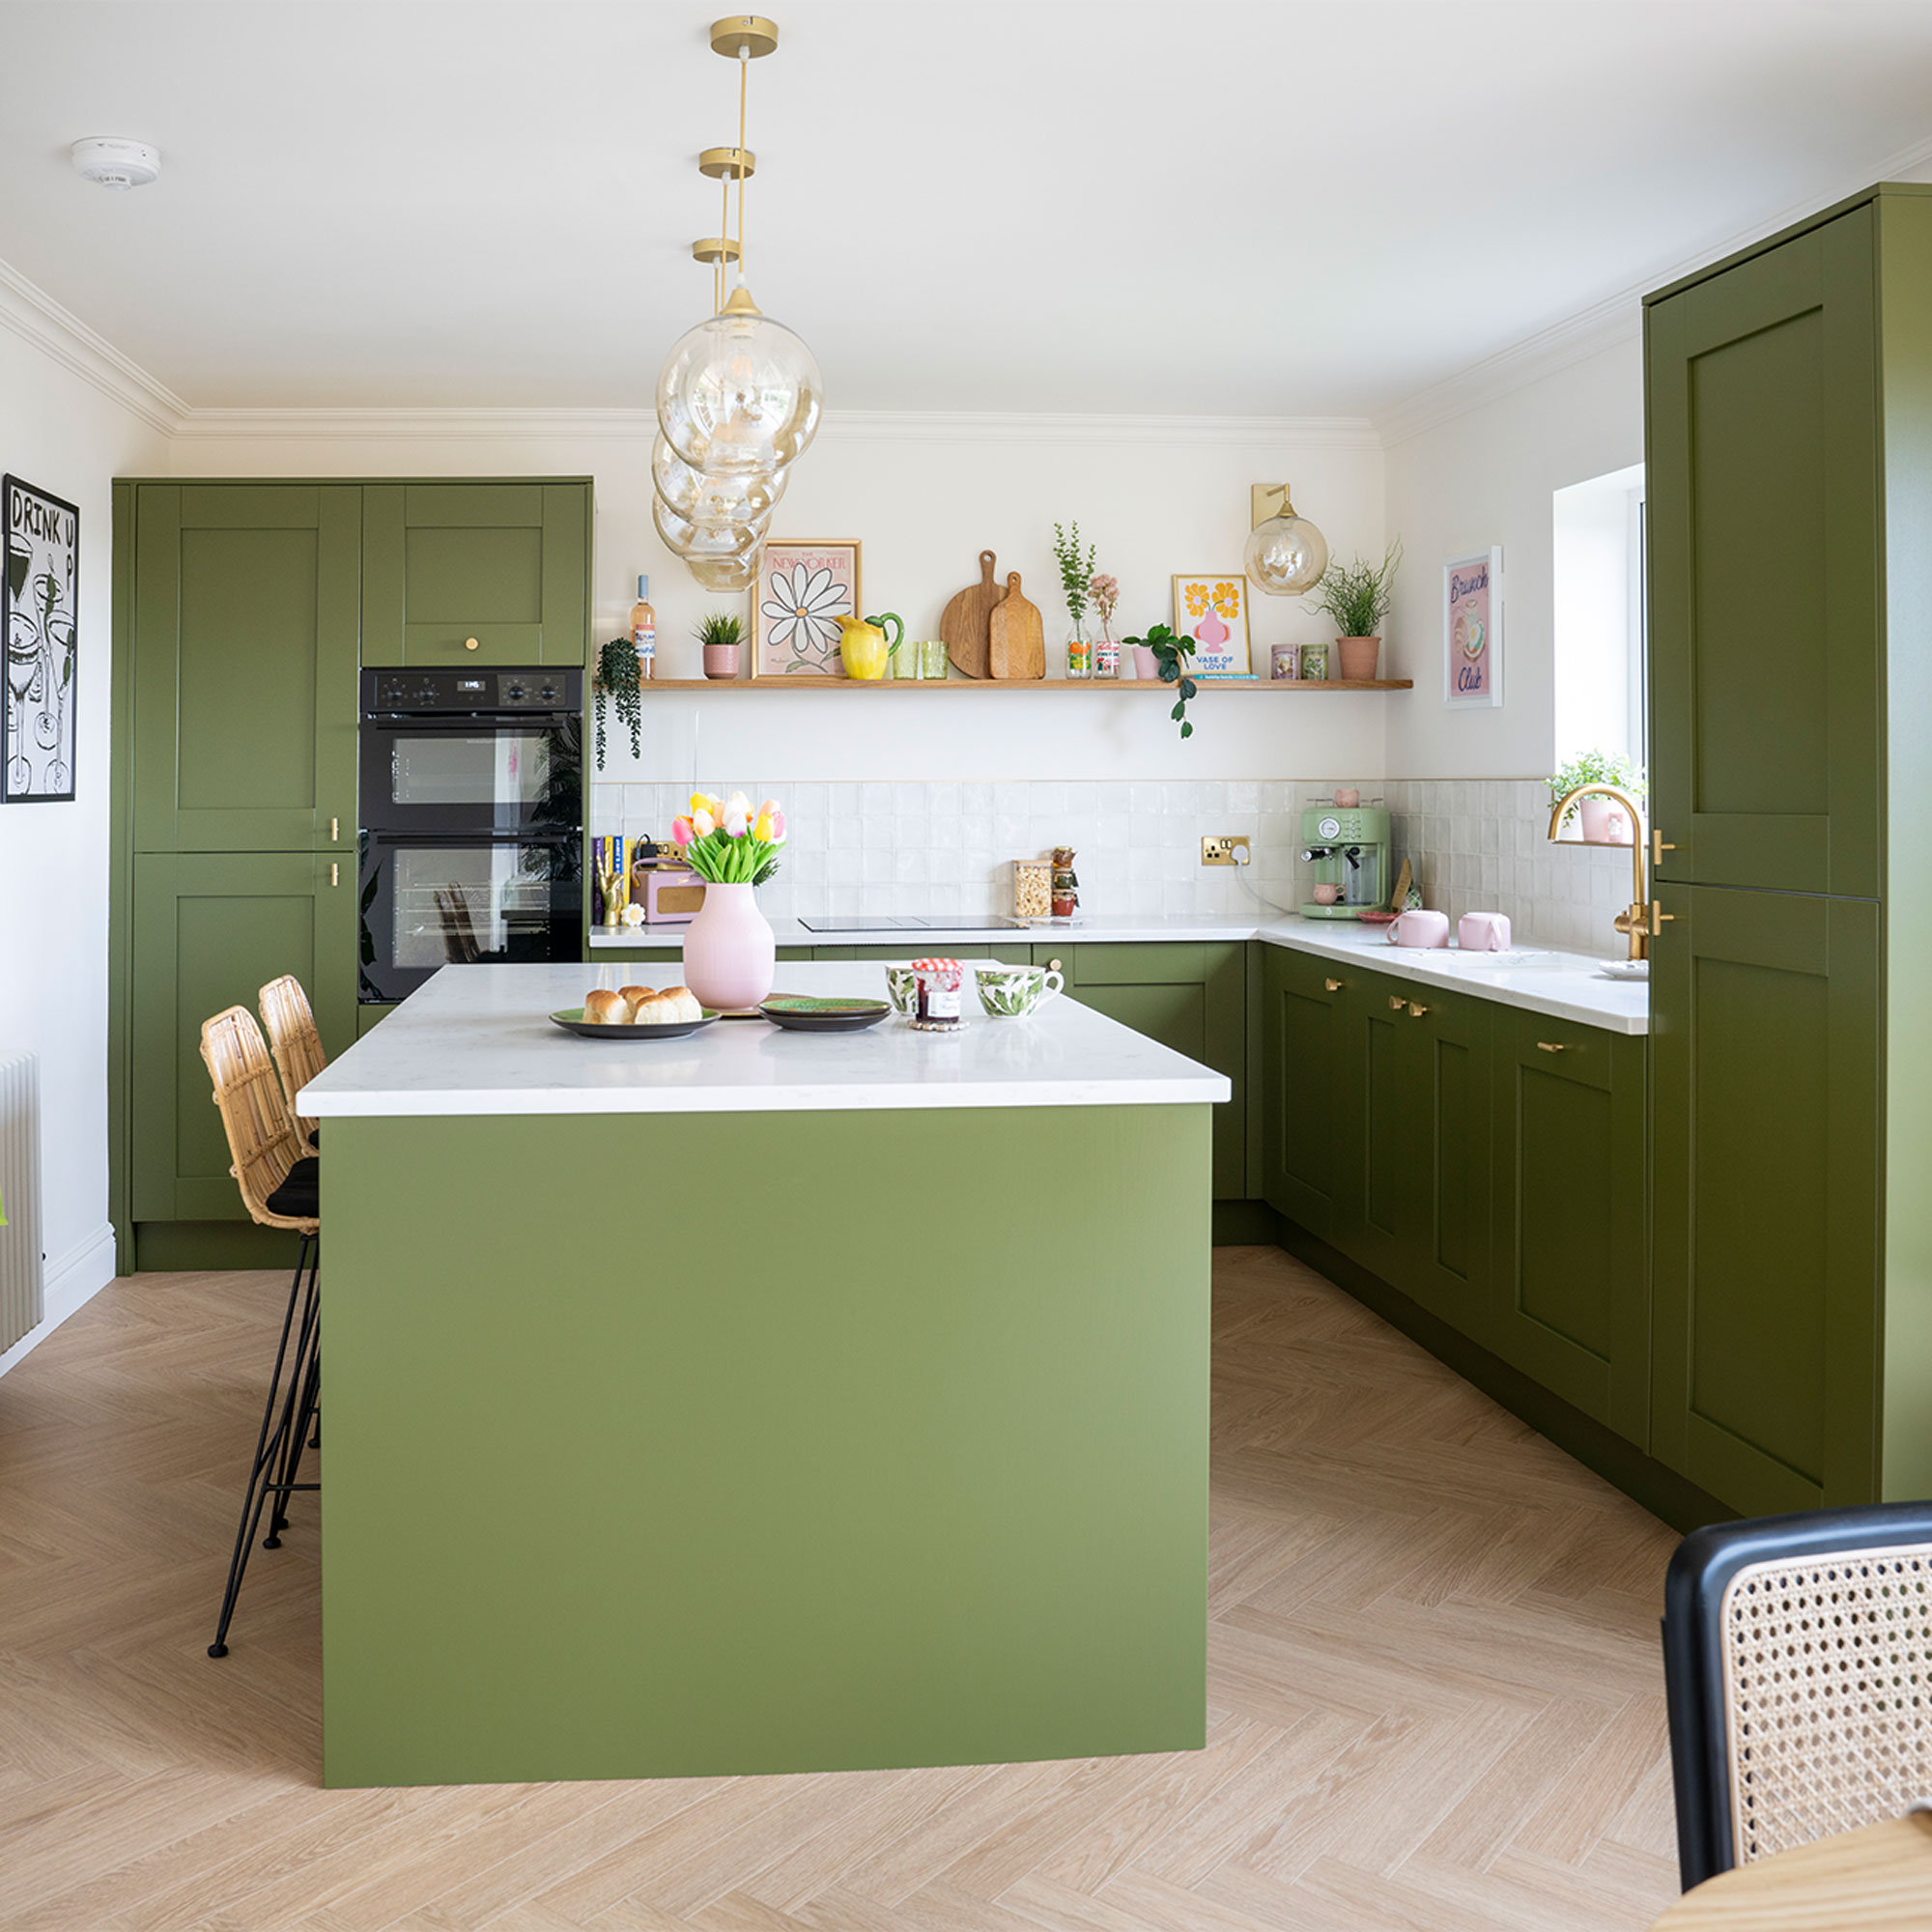 Green kitchen with central island